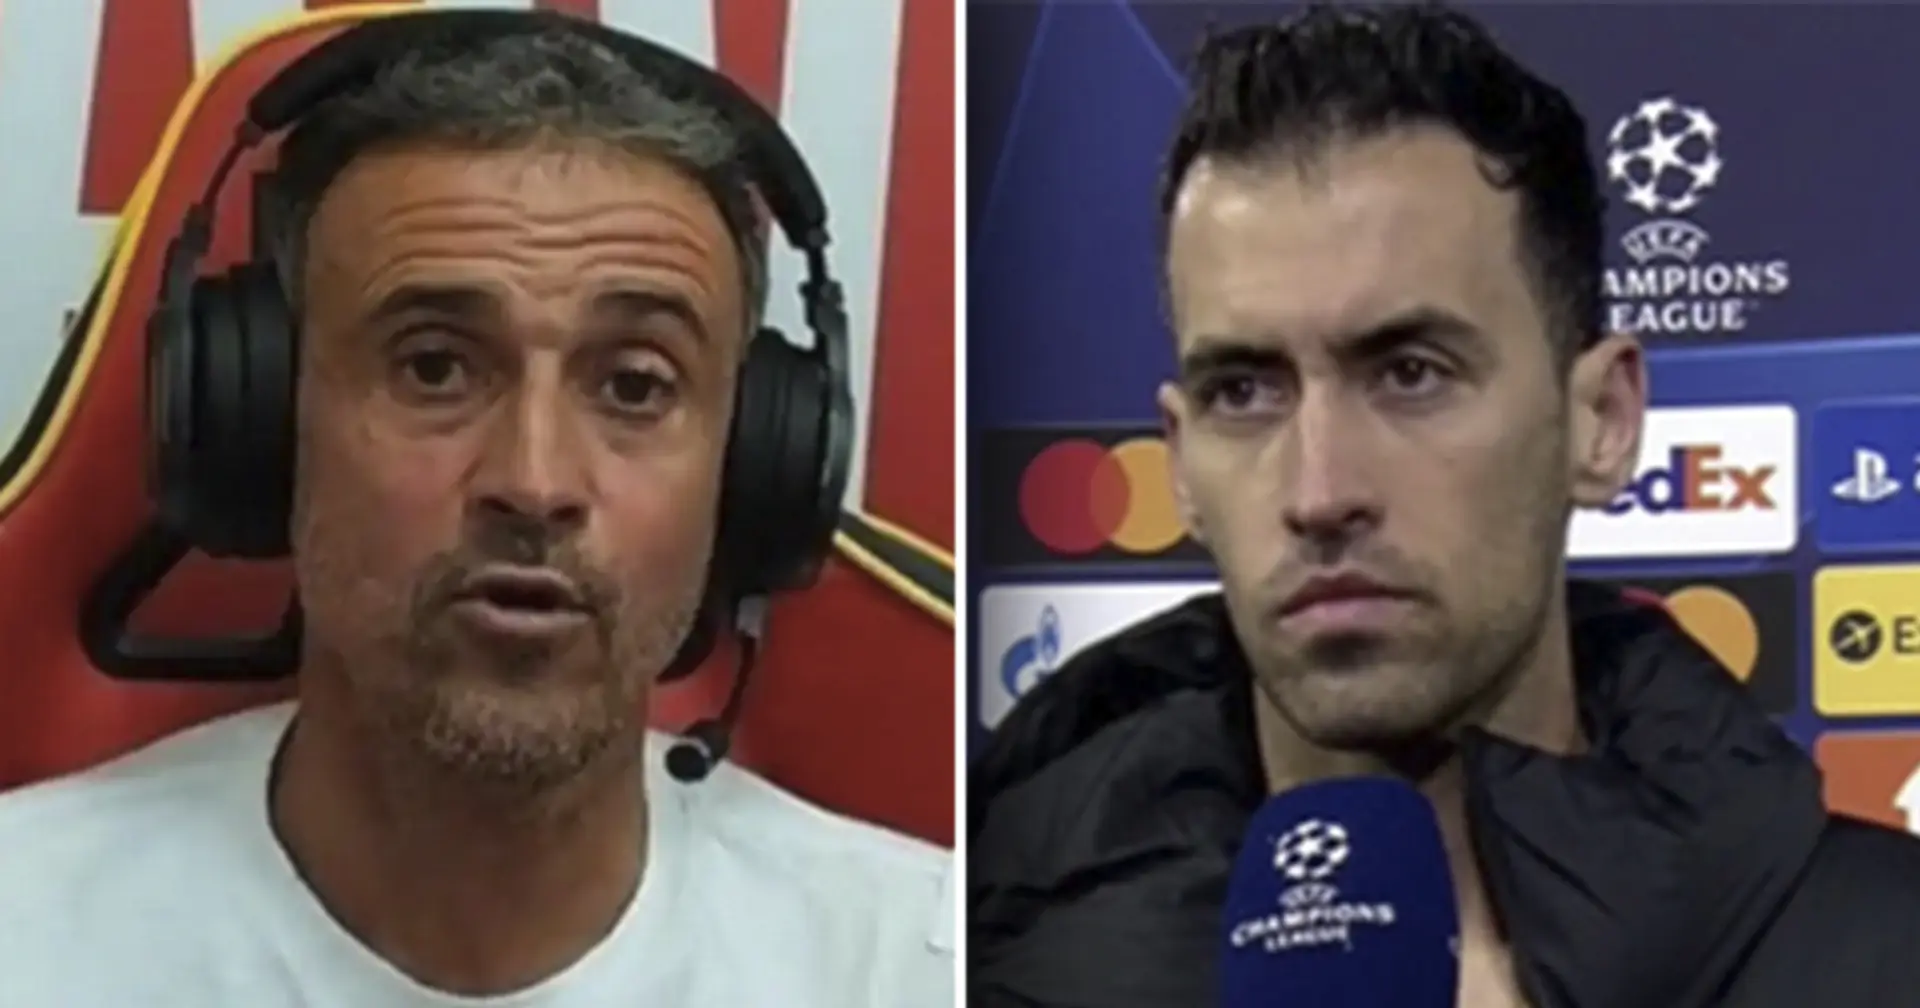 Luis Enrique names surprise Barca player he sees as manager in future, Busquets aside